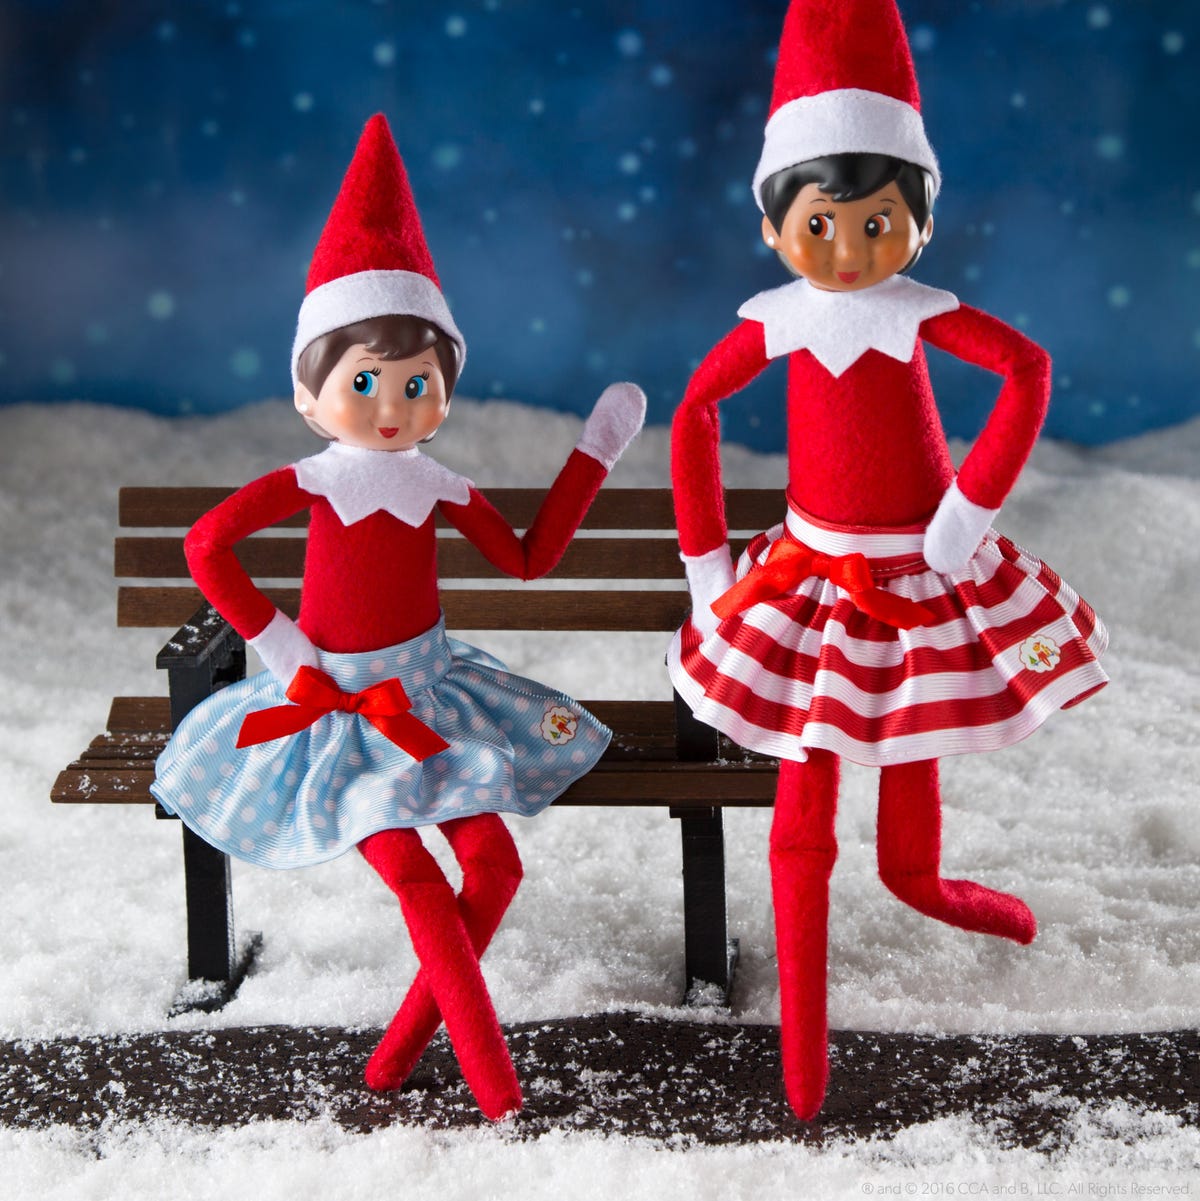 The Kindess Elves - Is this the new Elf on The Shelf?